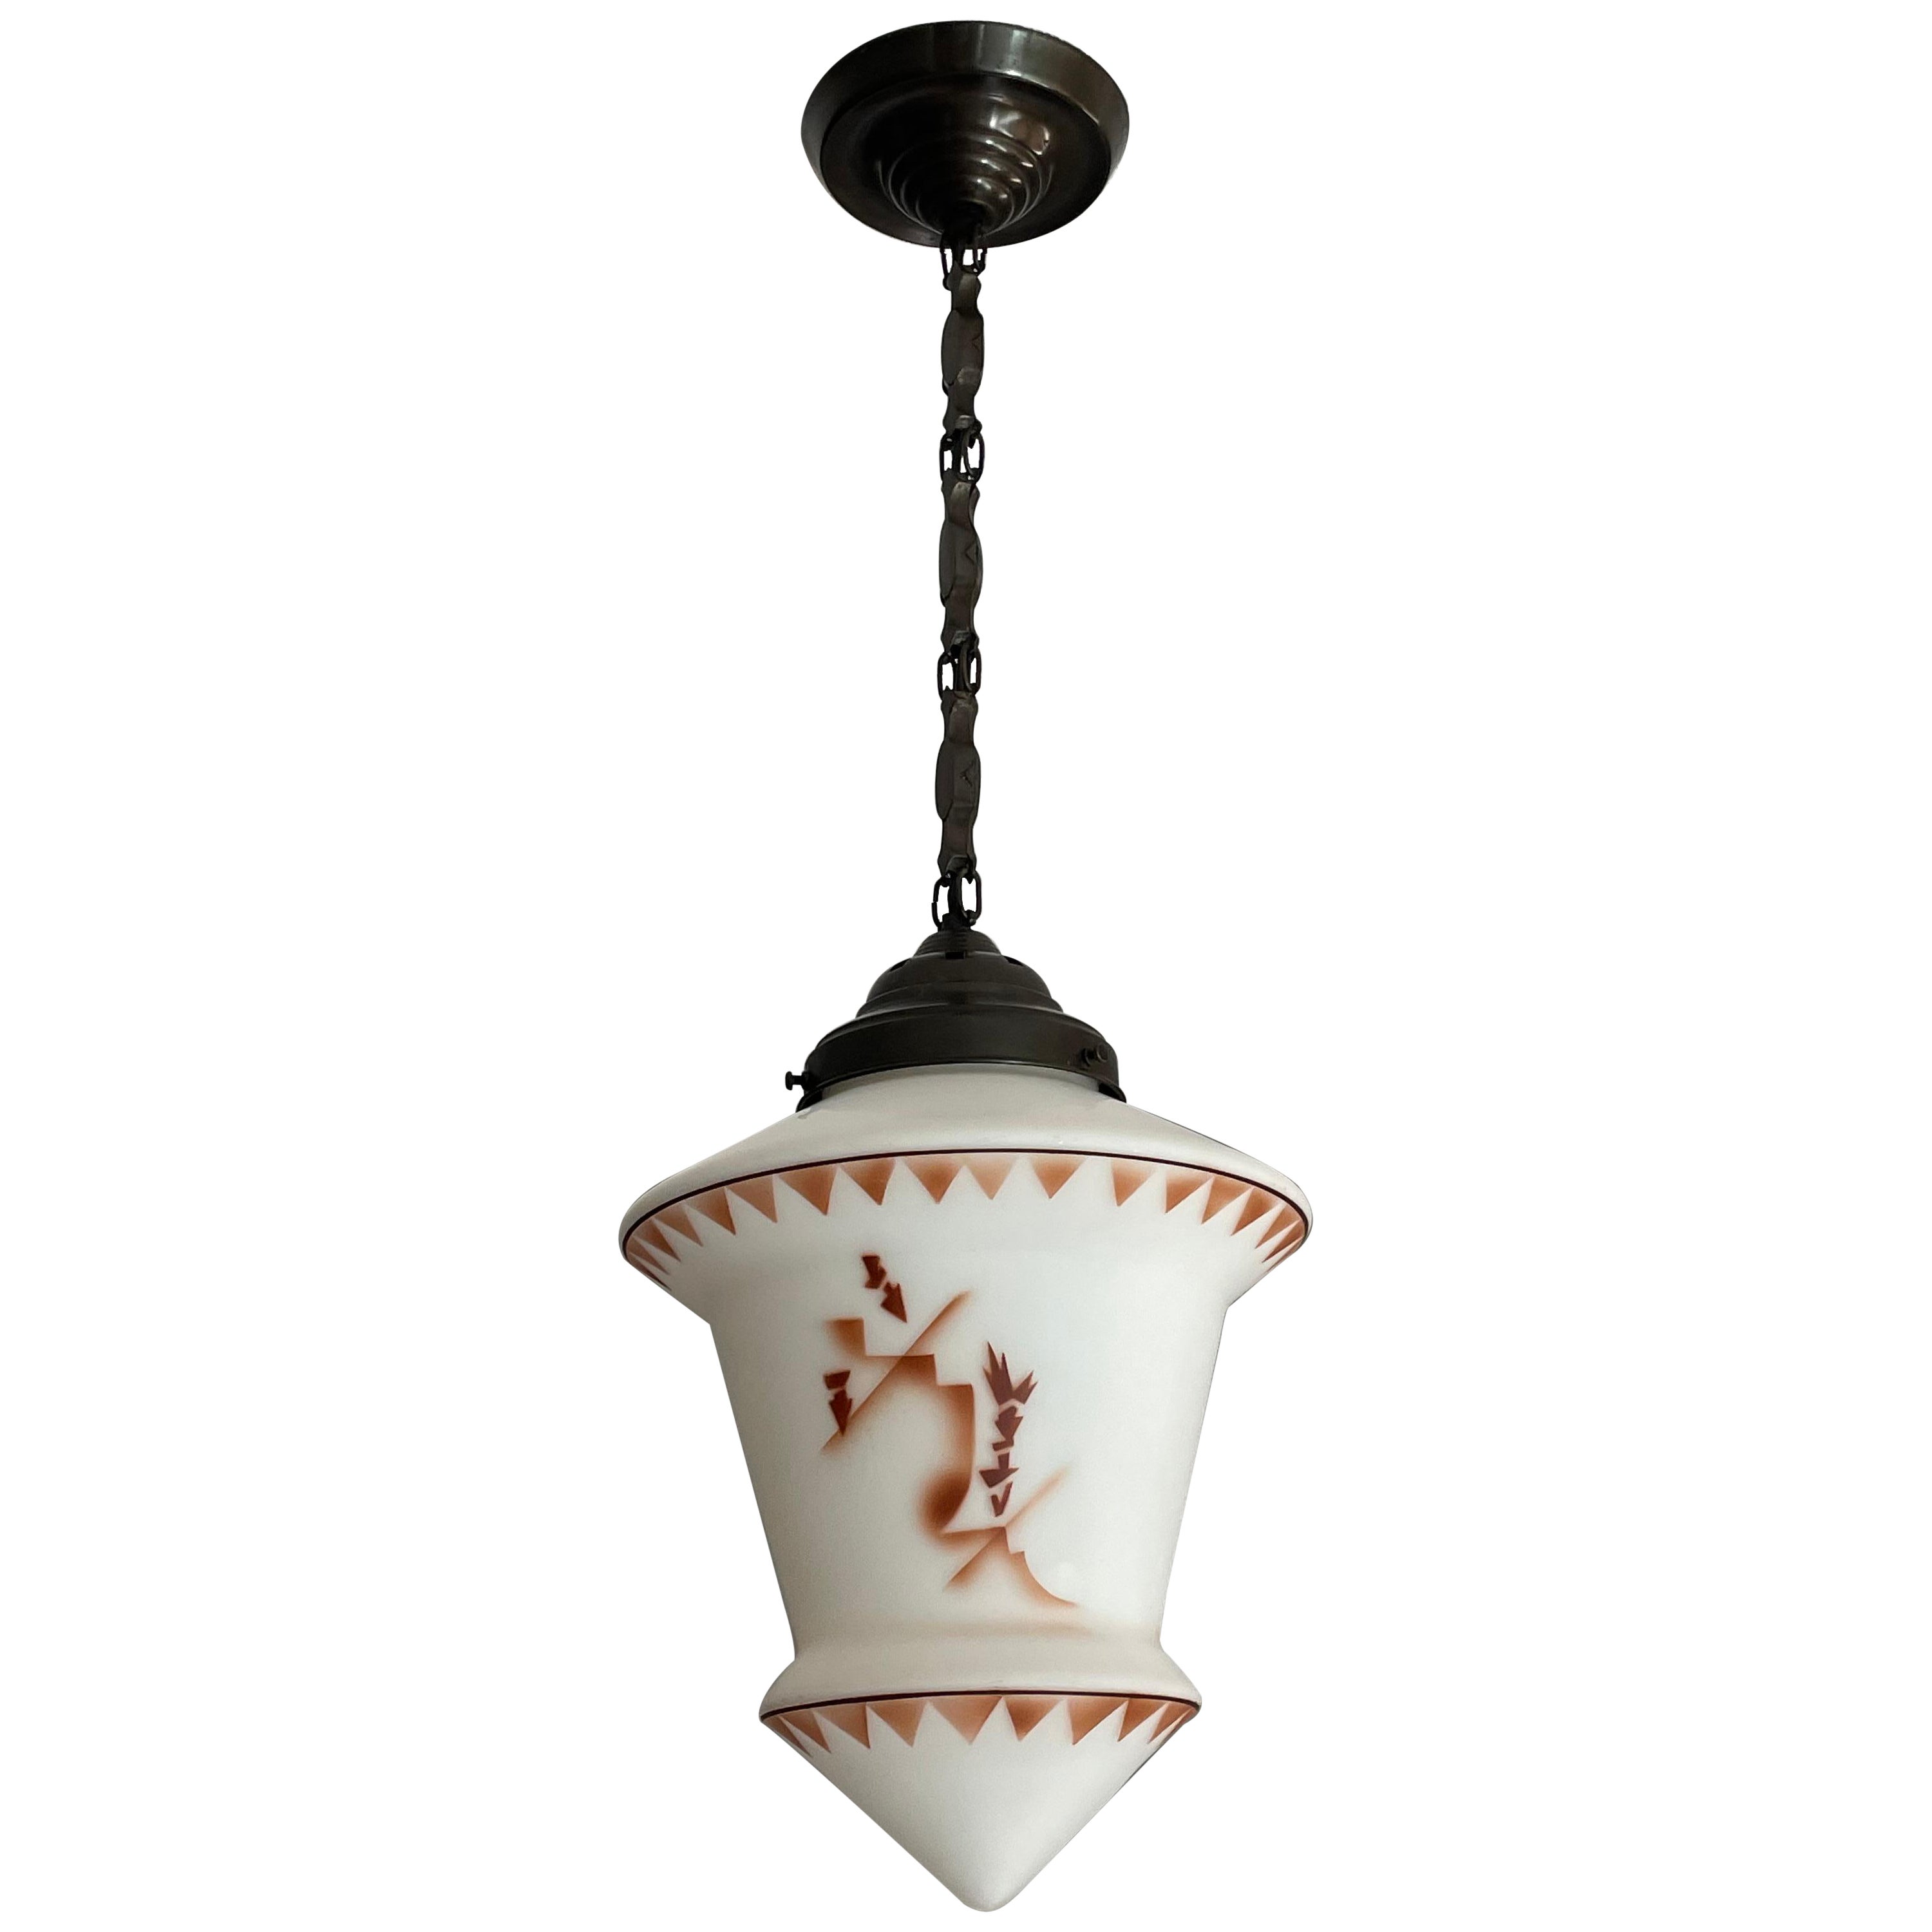 Art Deco Asian Style Lantern Pendant with Stylized Trees Graphics & Brass Canopy For Sale